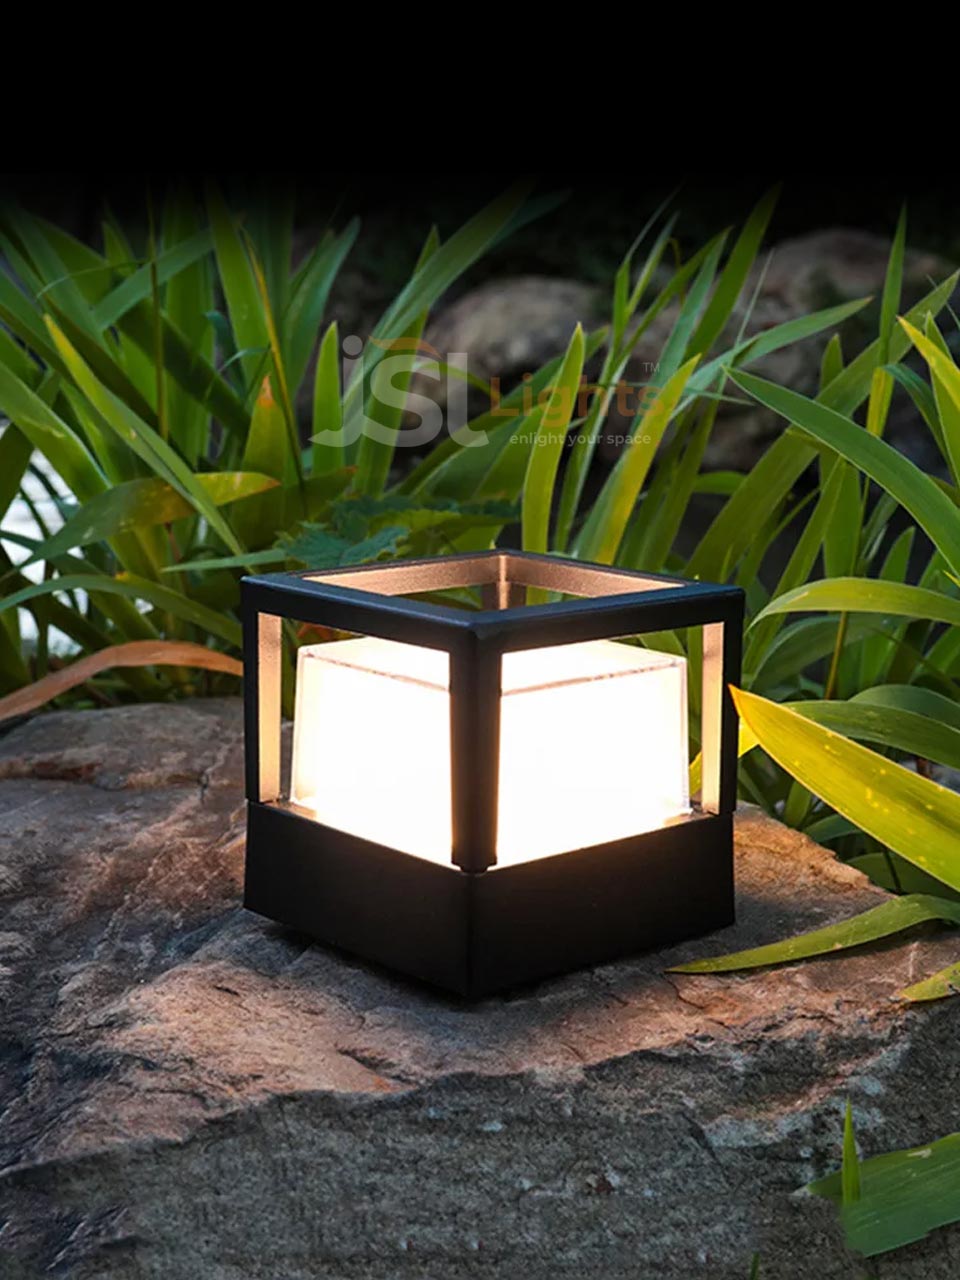 819 Small Square LED Gate Light for Outdoor Pillar 11 Inches Post Top Lamp with 12W Inbuilt LED Light Aluminium Body IP65 ON